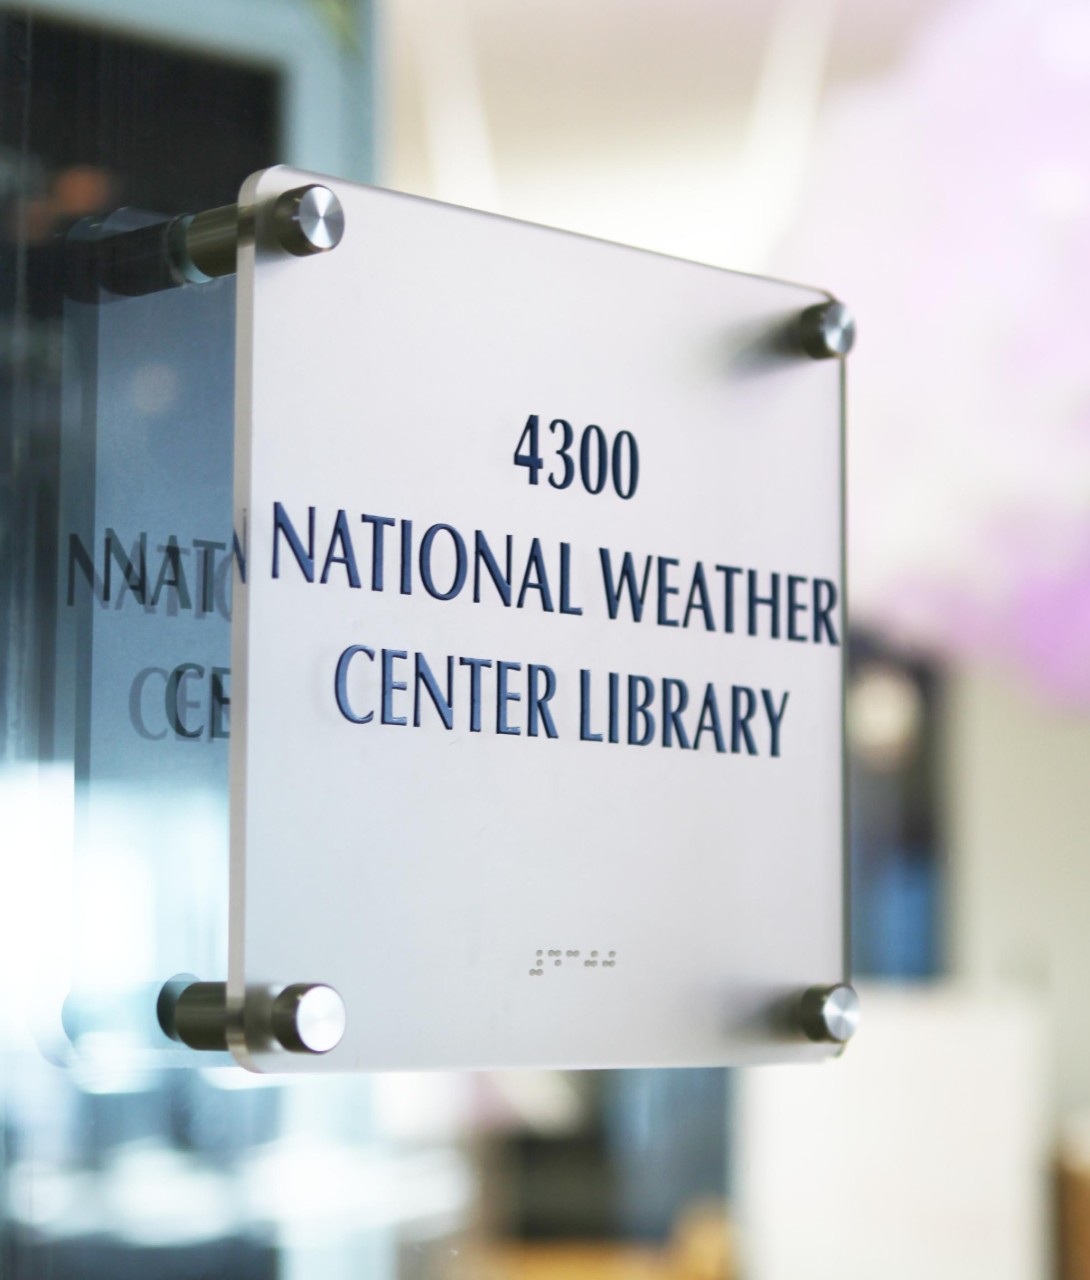 The National Weather Center Library is located in Suite 4300 of the National Weather Center. 4300, National Weather Center Library.